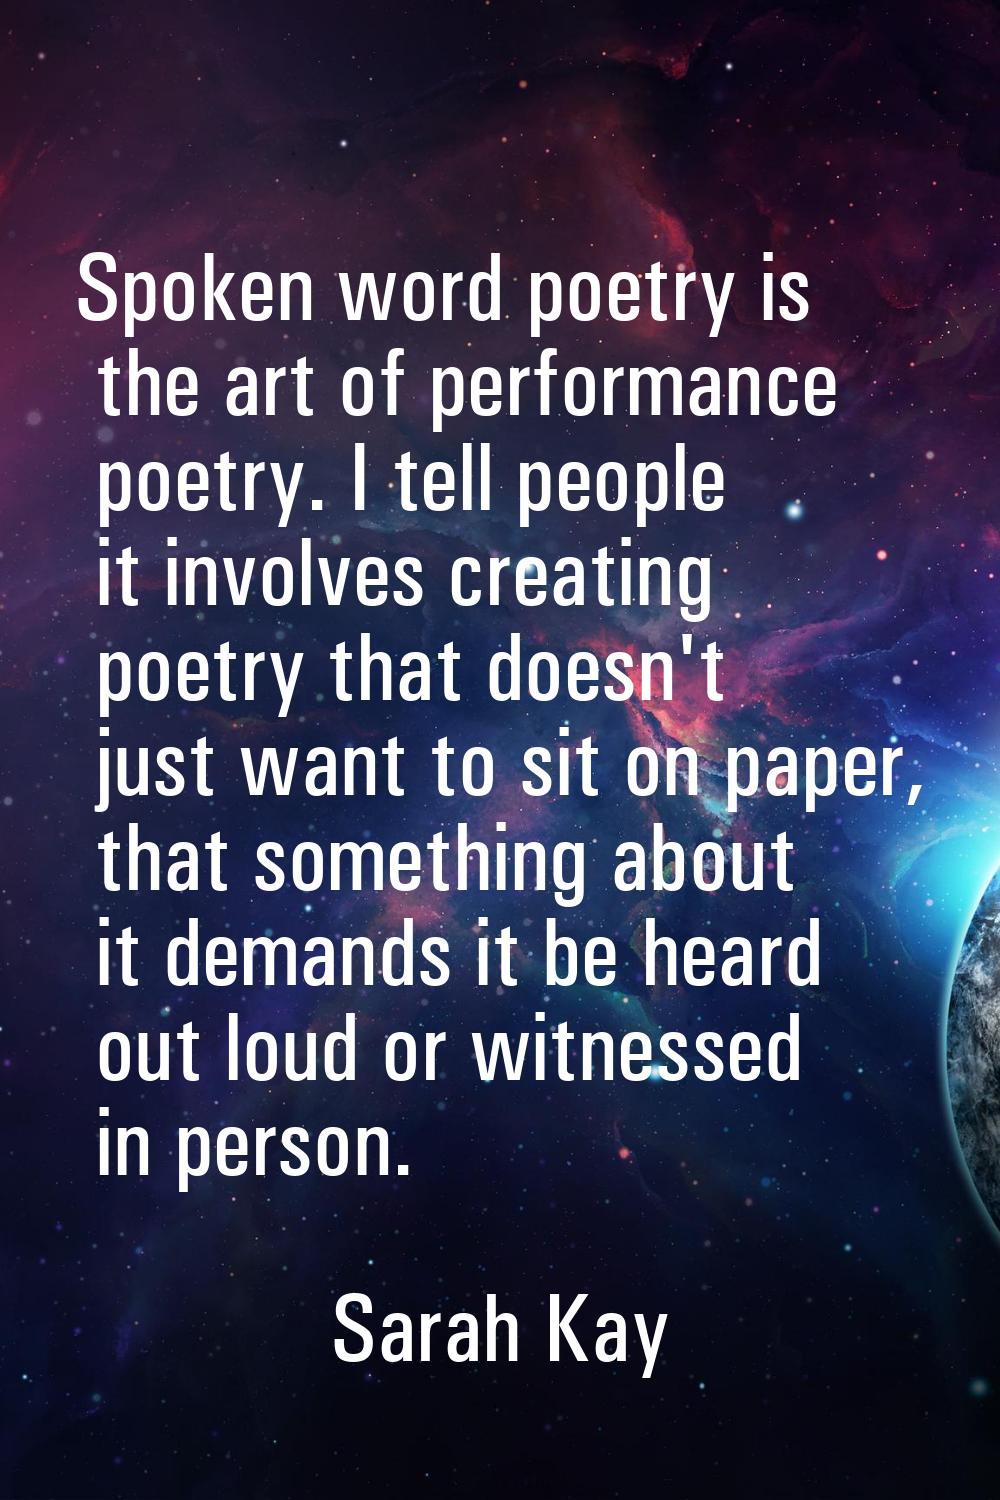 Spoken word poetry is the art of performance poetry. I tell people it involves creating poetry that